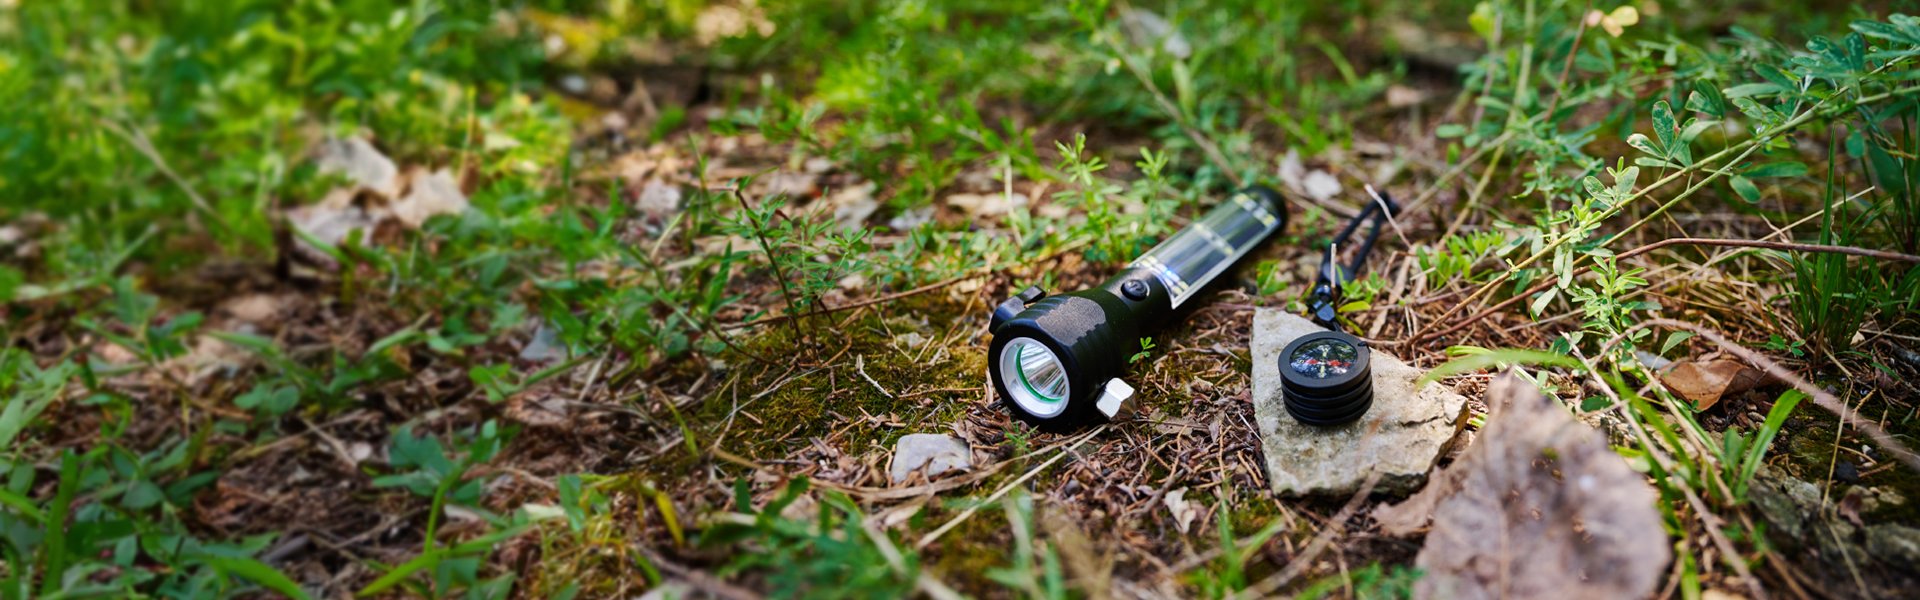 HaloXT laying on the ground with the compass attachment sitting next to it on a rock